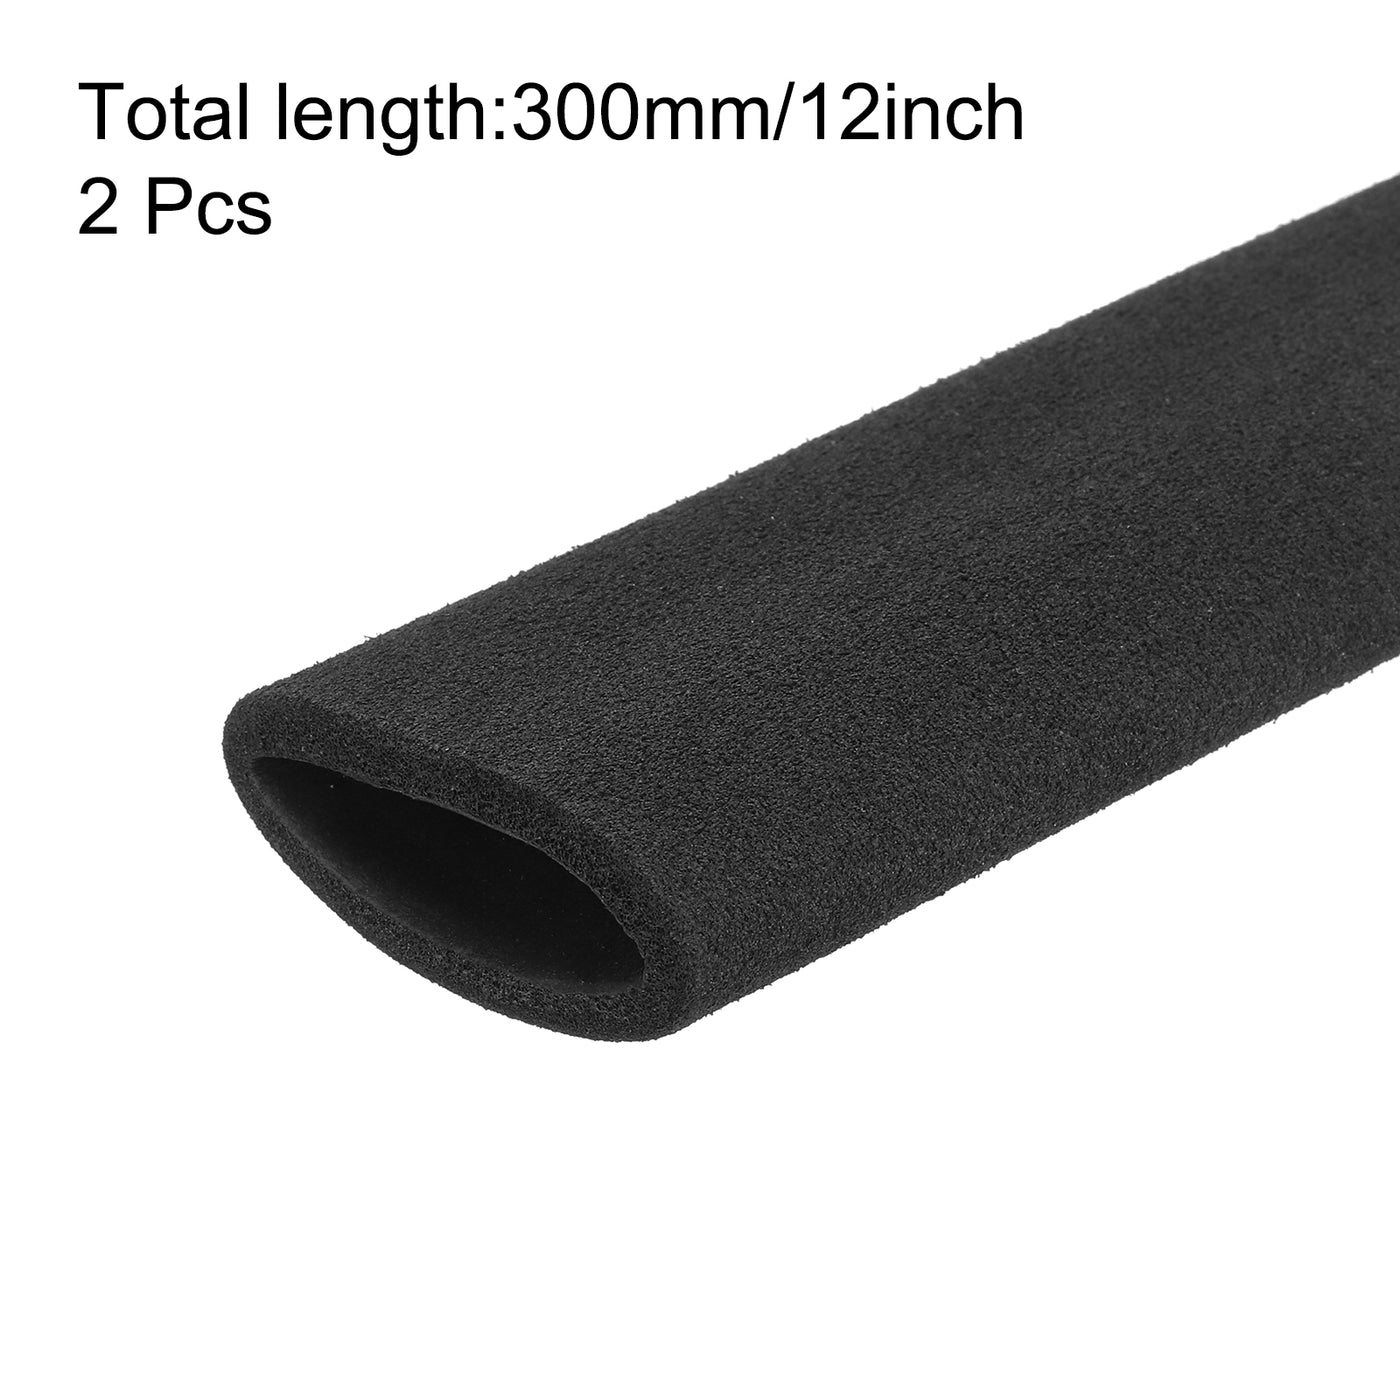 uxcell Uxcell Pipe Insulation Tube Foam Tubing for Handle Grip Support 32mm ID 44mm OD 300mm Heat Preservation Black 2pcs